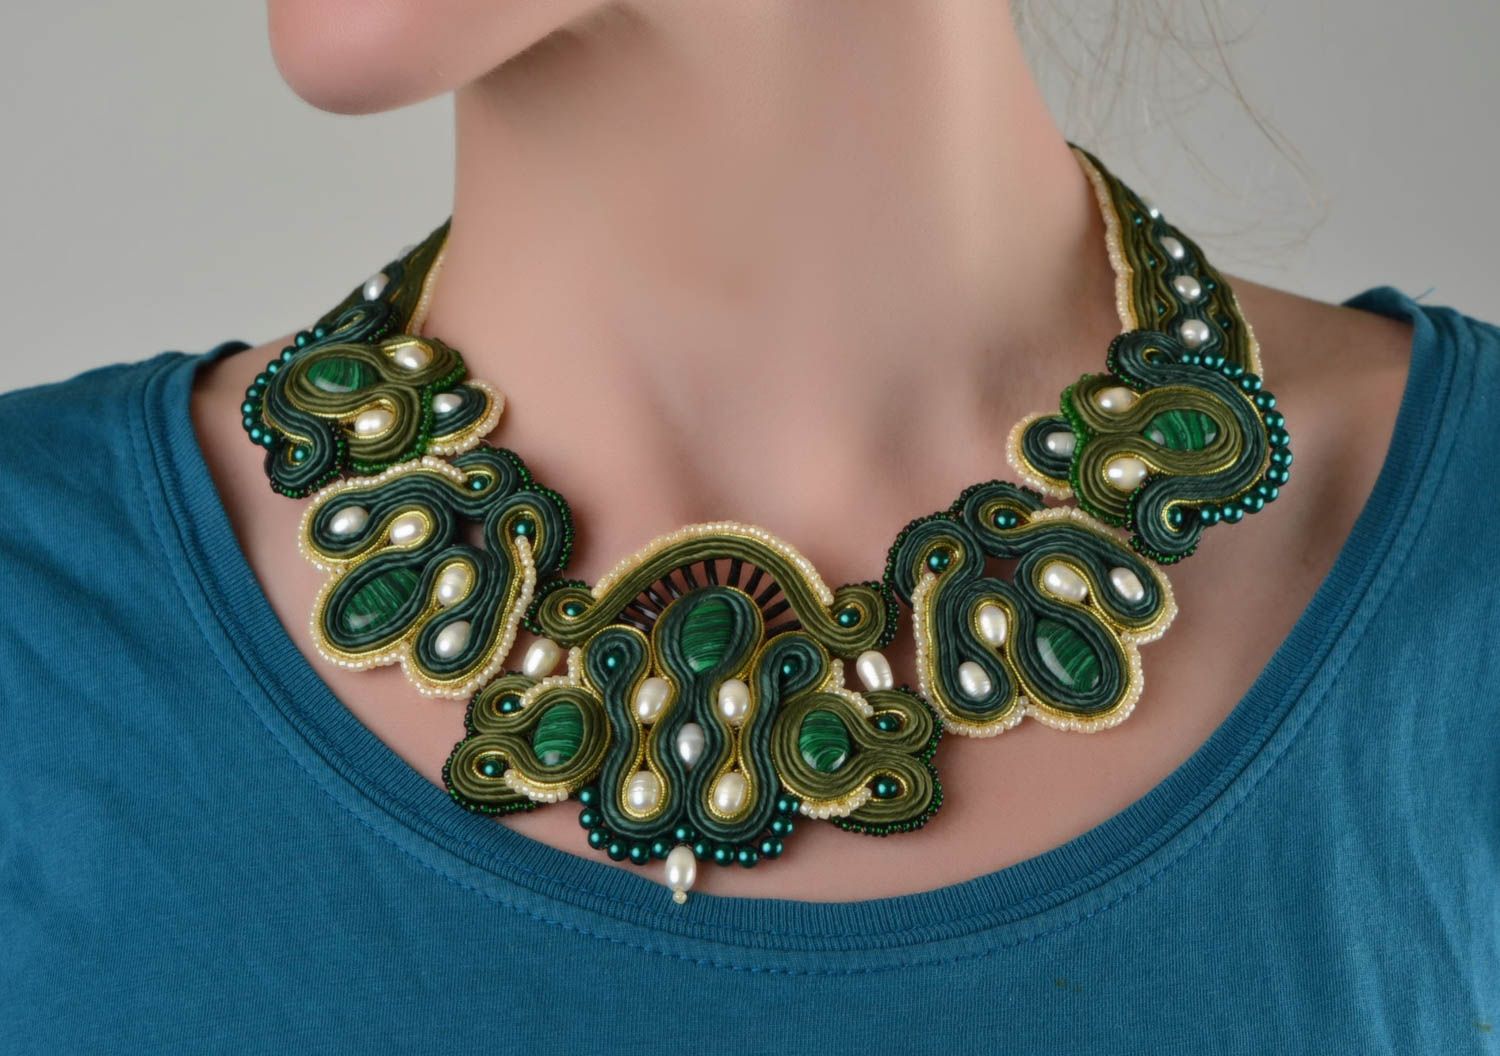 Handmade designer massive soutache necklace with natural stones and pearls photo 1